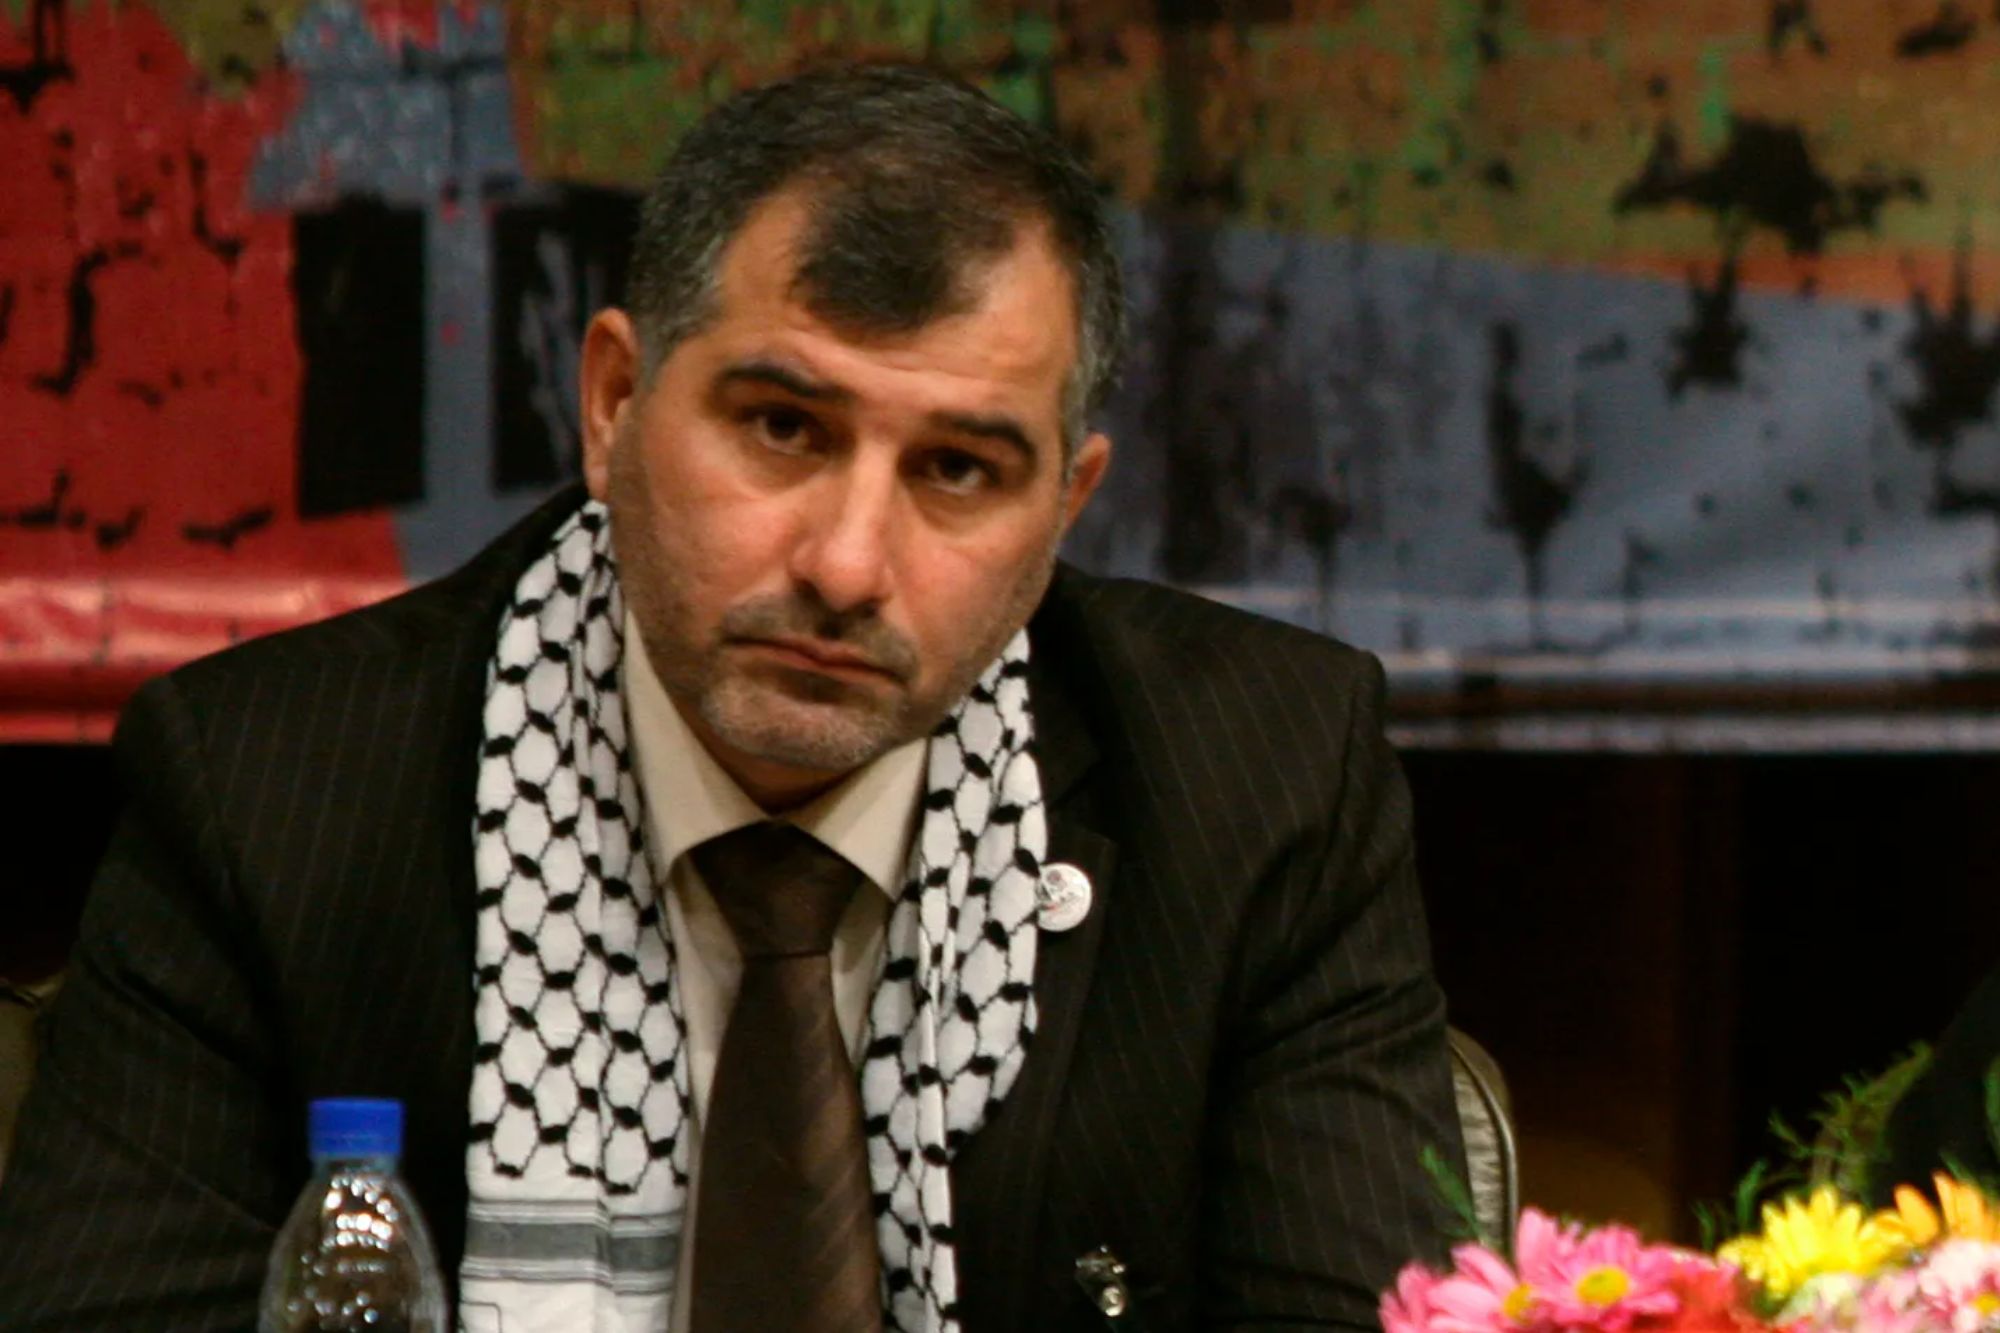 Pro-Palestinian activist Majed Al-Zeer is accused of being a key liaison for Hamas in Europe